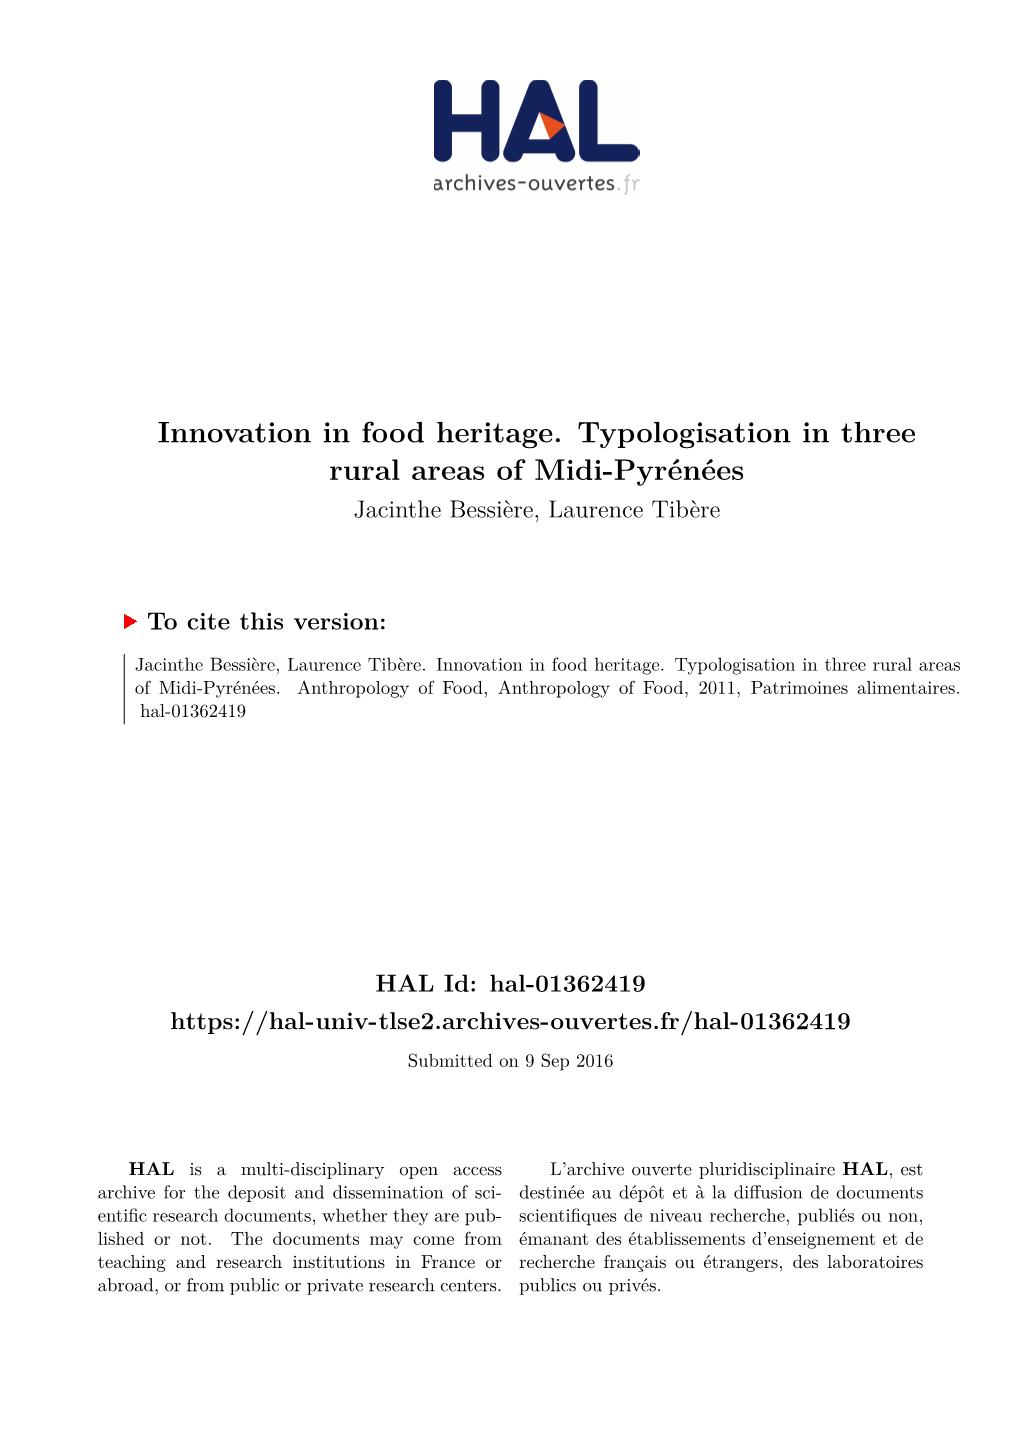 Innovation in Food Heritage. Typologisation in Three Rural Areas of Midi-Pyrénées Jacinthe Bessière, Laurence Tibère